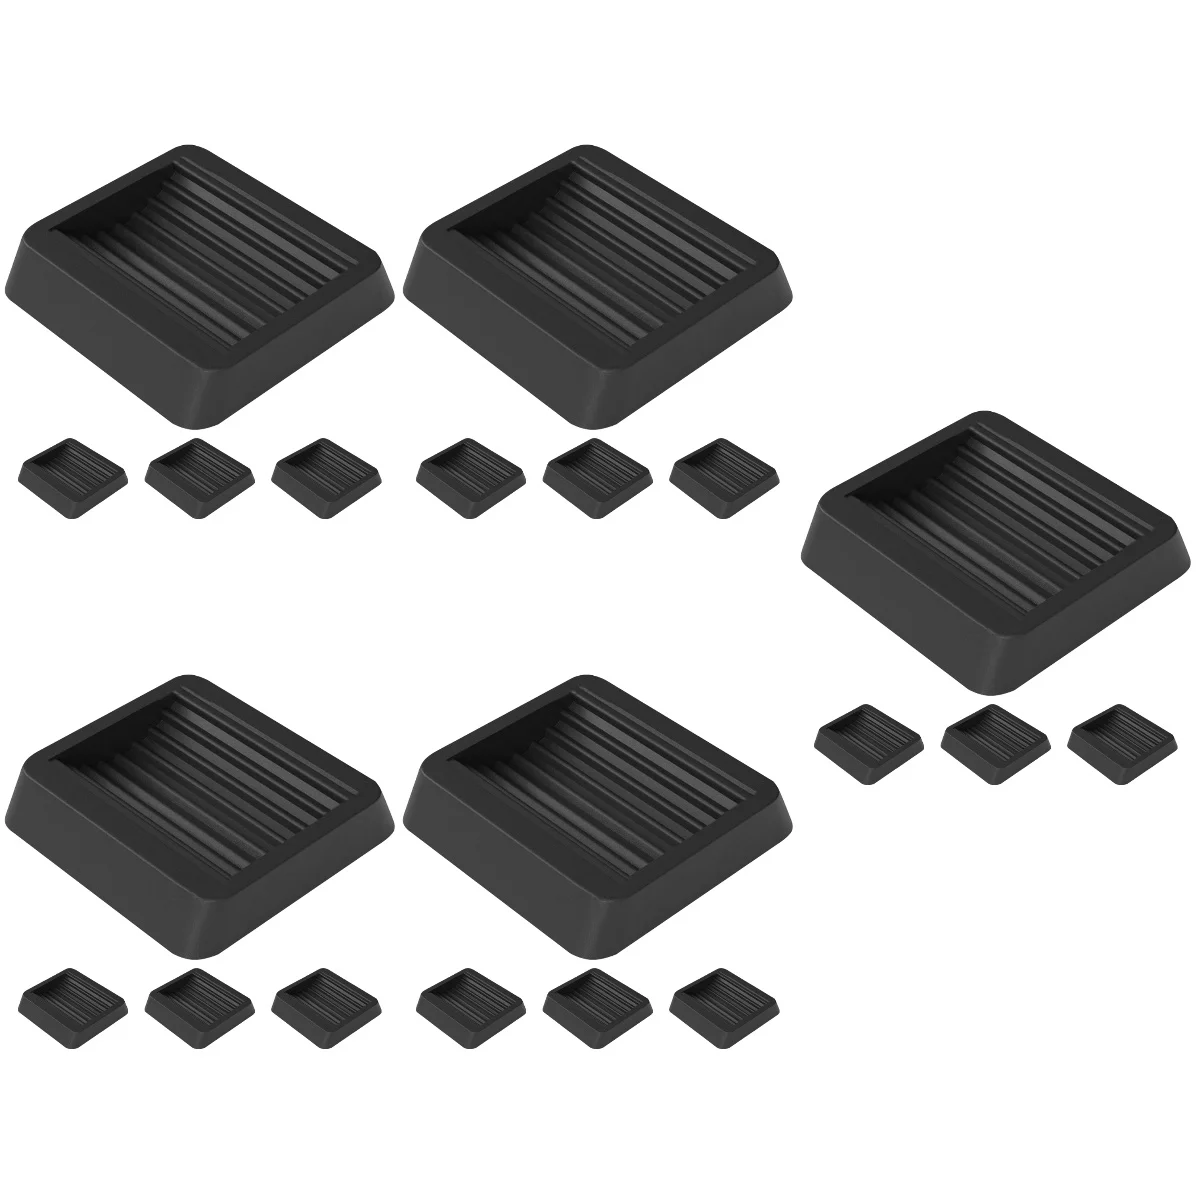 20 Pcs Caster Brake Furniture Protectors Rubber Pads Chair Stoppers Couch Foot Rest Feet Floor Carpet Mats Seat Cup